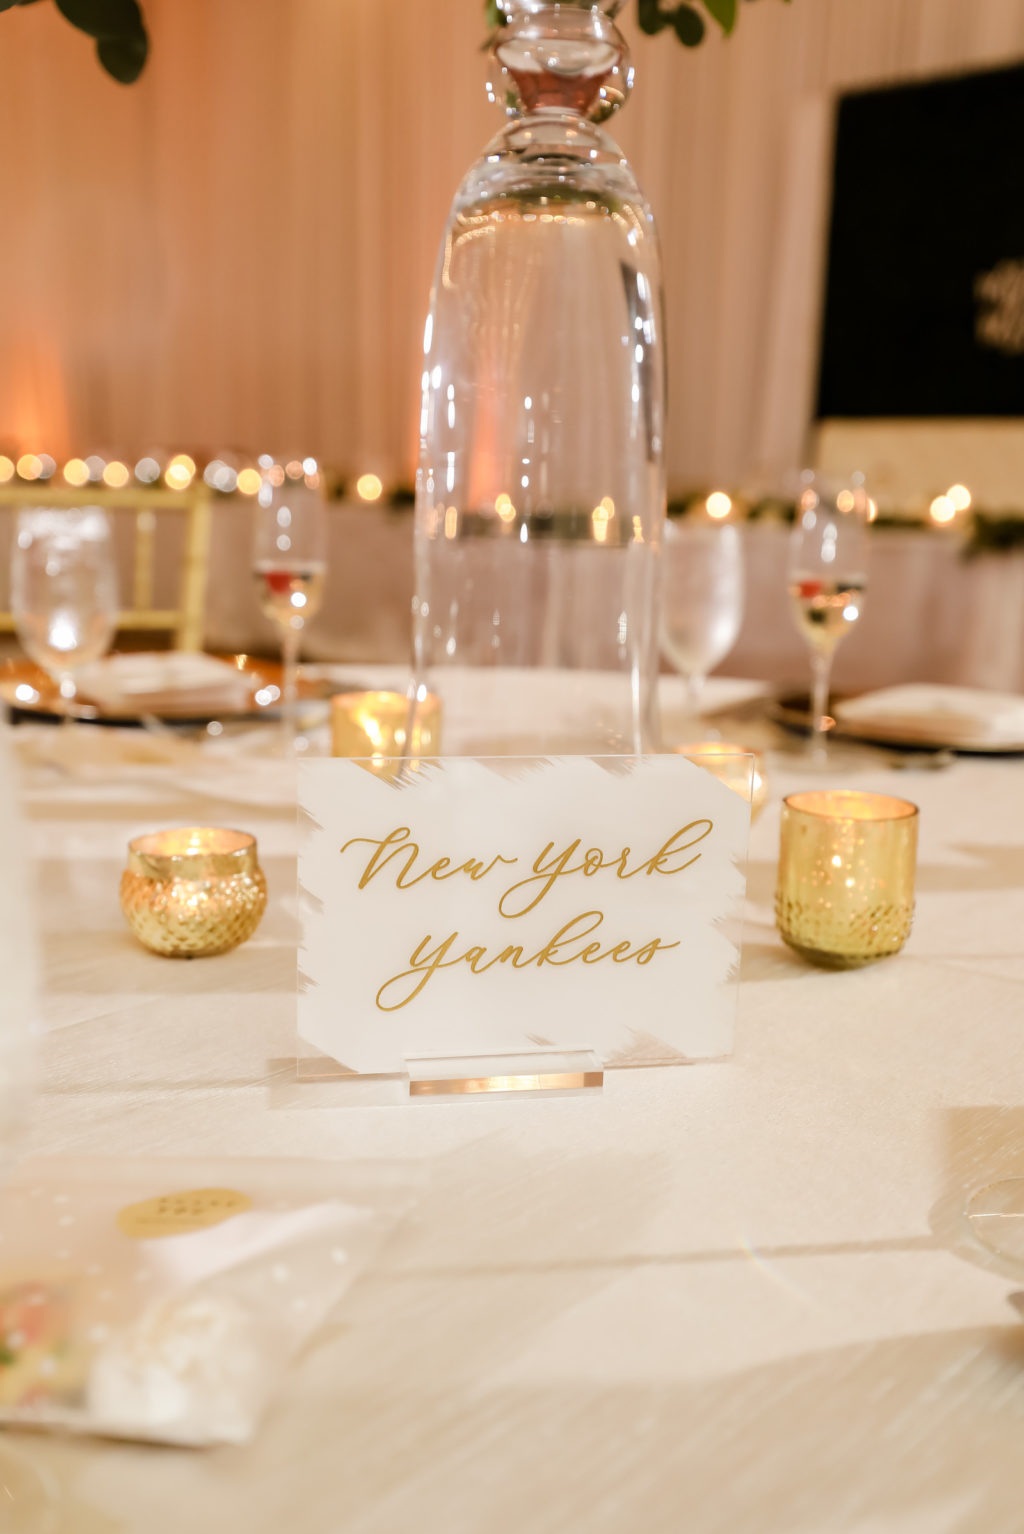 Elegant Wedding Reception Decor, Unique Acrylic White and Gold Table Place Card "New York Yankees" | Tampa Bay Wedding Photographer Lifelong Photography Studio | Clearwater Beach Wedding Planner Blue Skies Weddings and Events